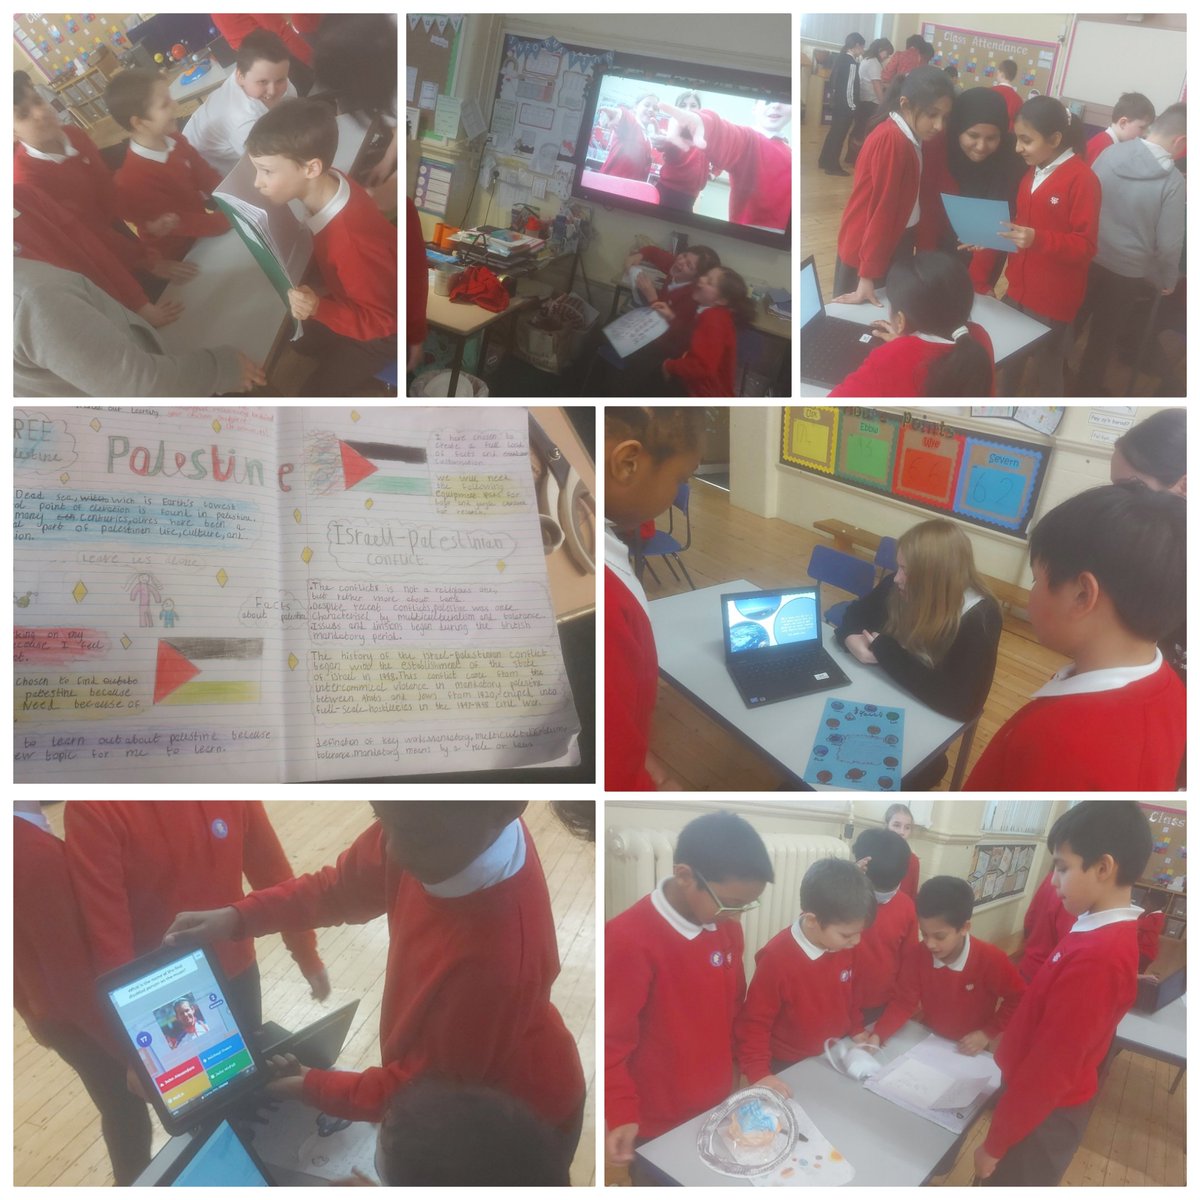 So impressed with the amazing independent project work carried out yesterday! Such amazing variety and the children shared their learning with such confidence and passion ♥️ @StWoolosPrimary #creative #ethical #confident #ambitiousandcapable